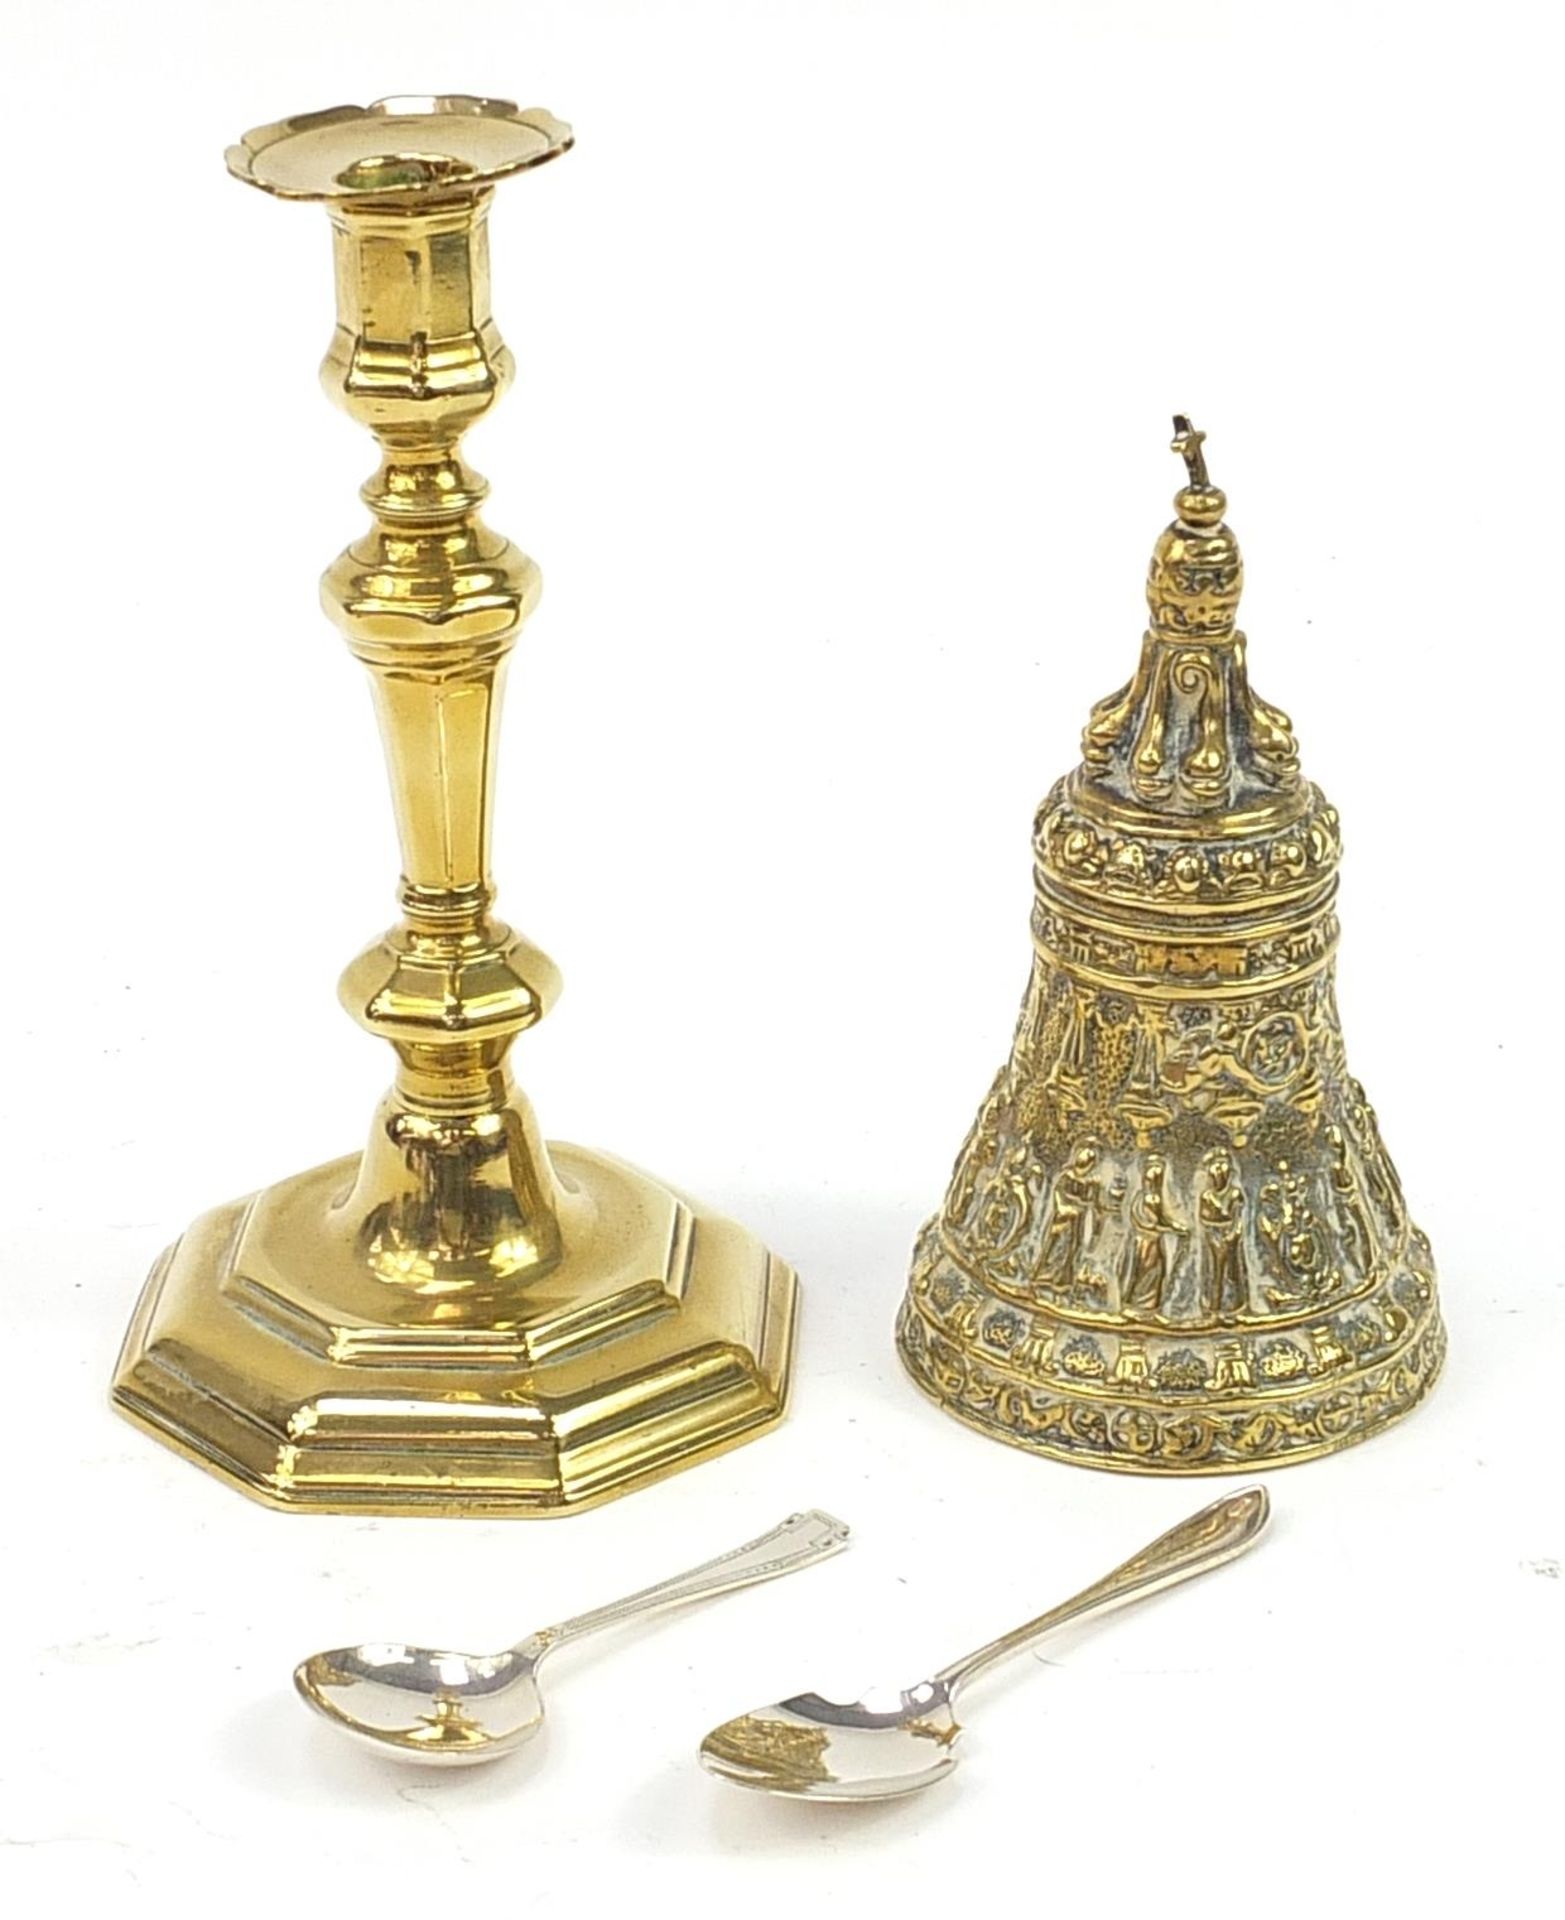 Metalware comprising a heavy gilt brass bell, candlestick and two silver spoons, the largest 23cm